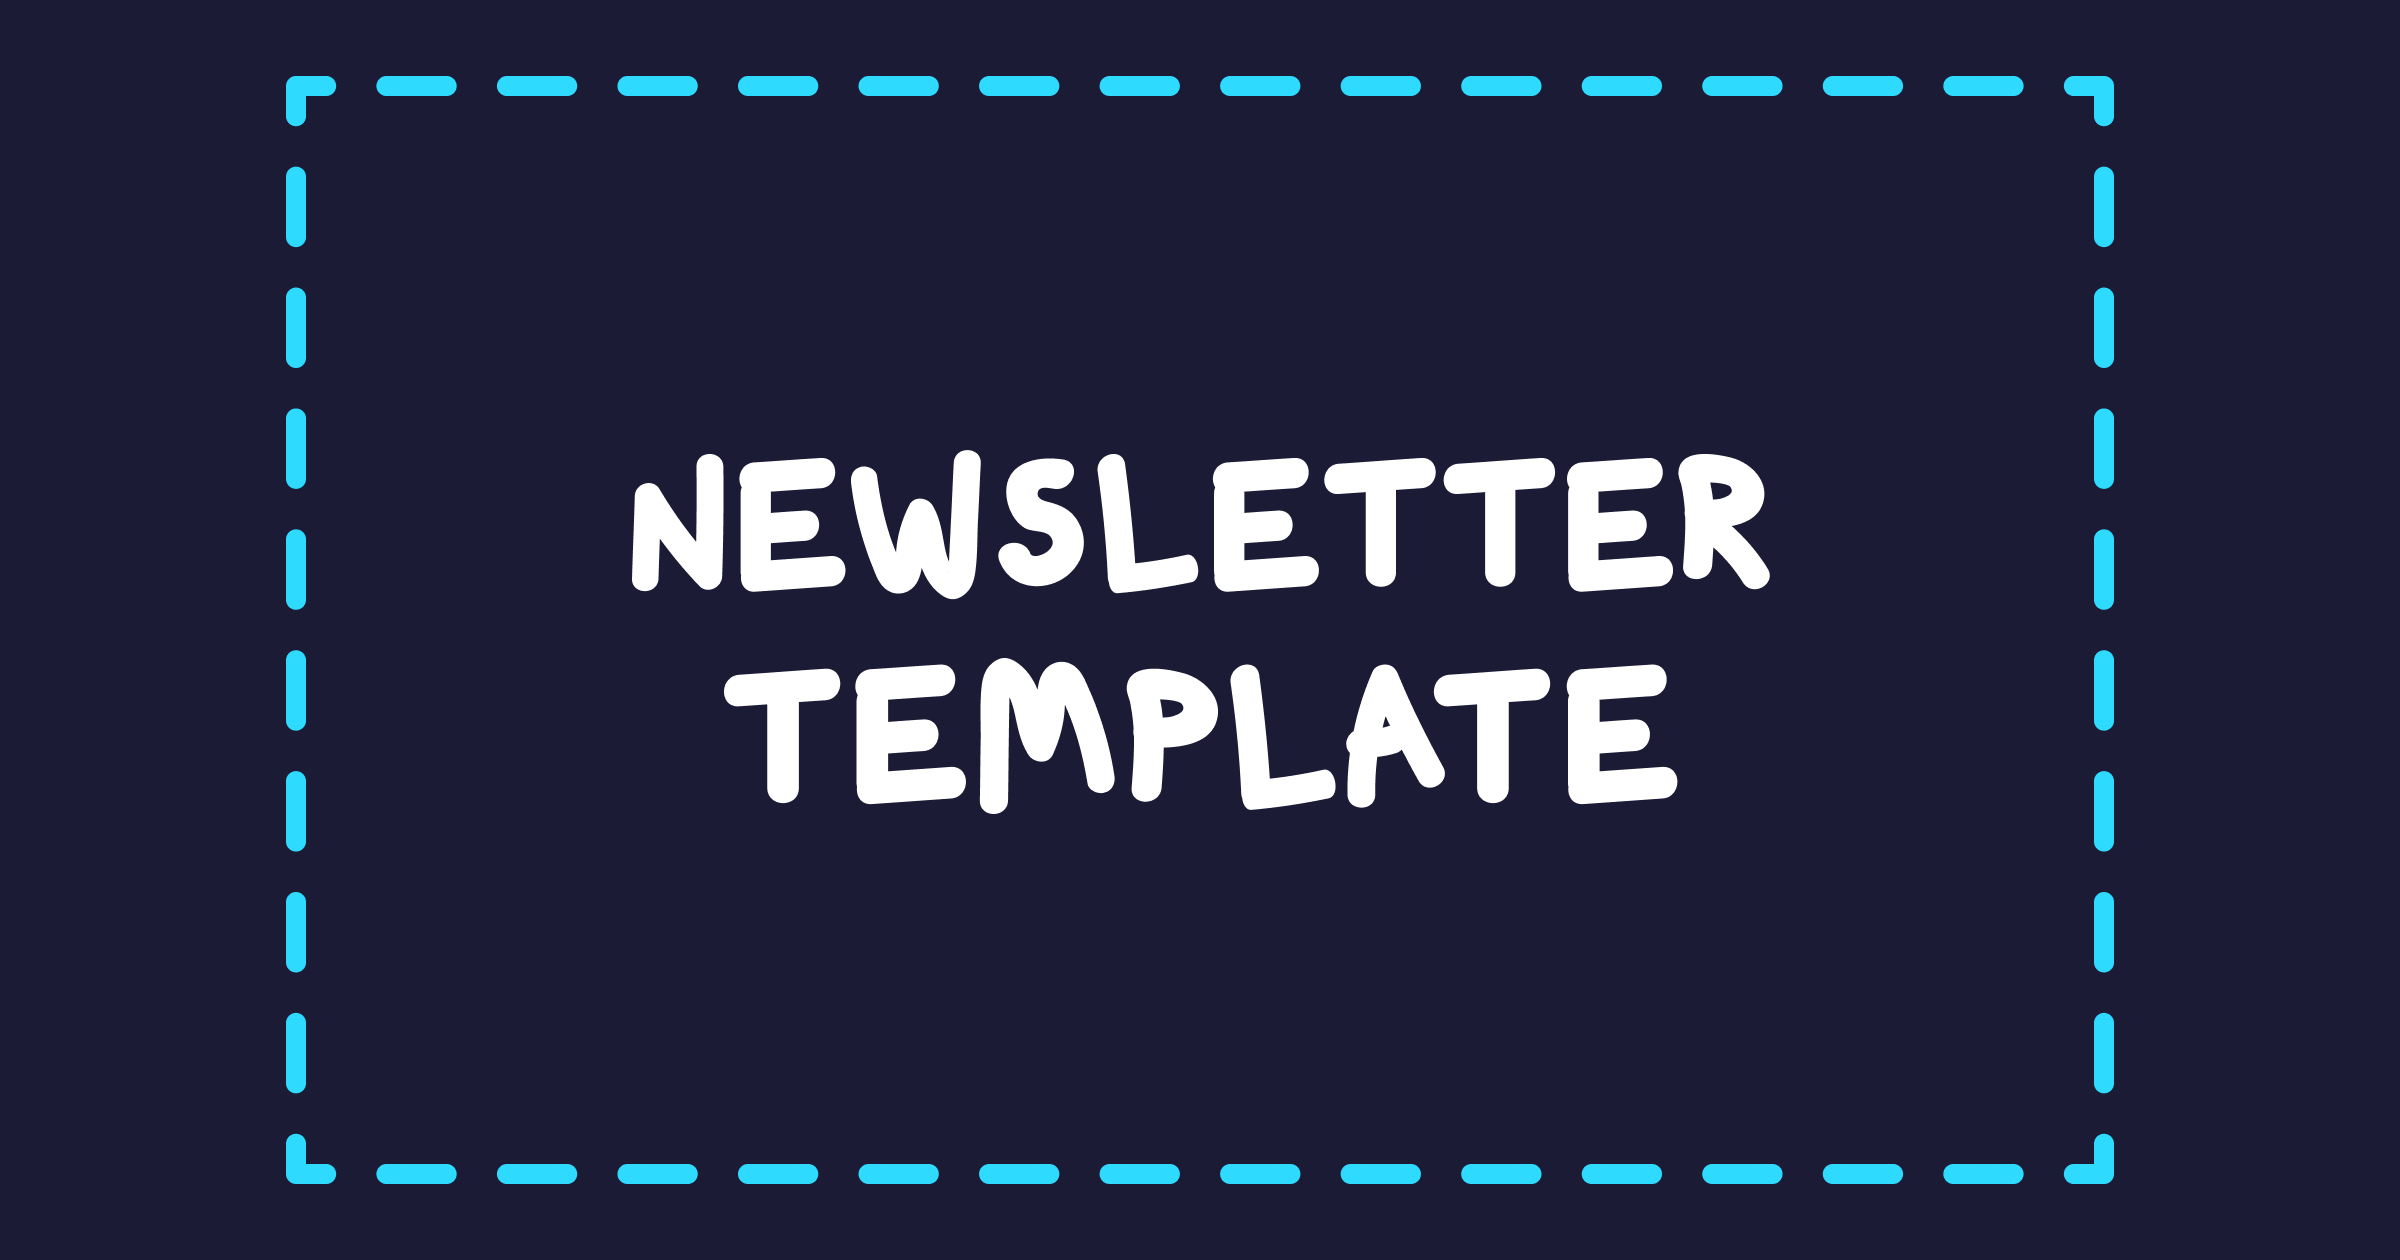 Want to send a newsletter? Use this as your starting point 🏁